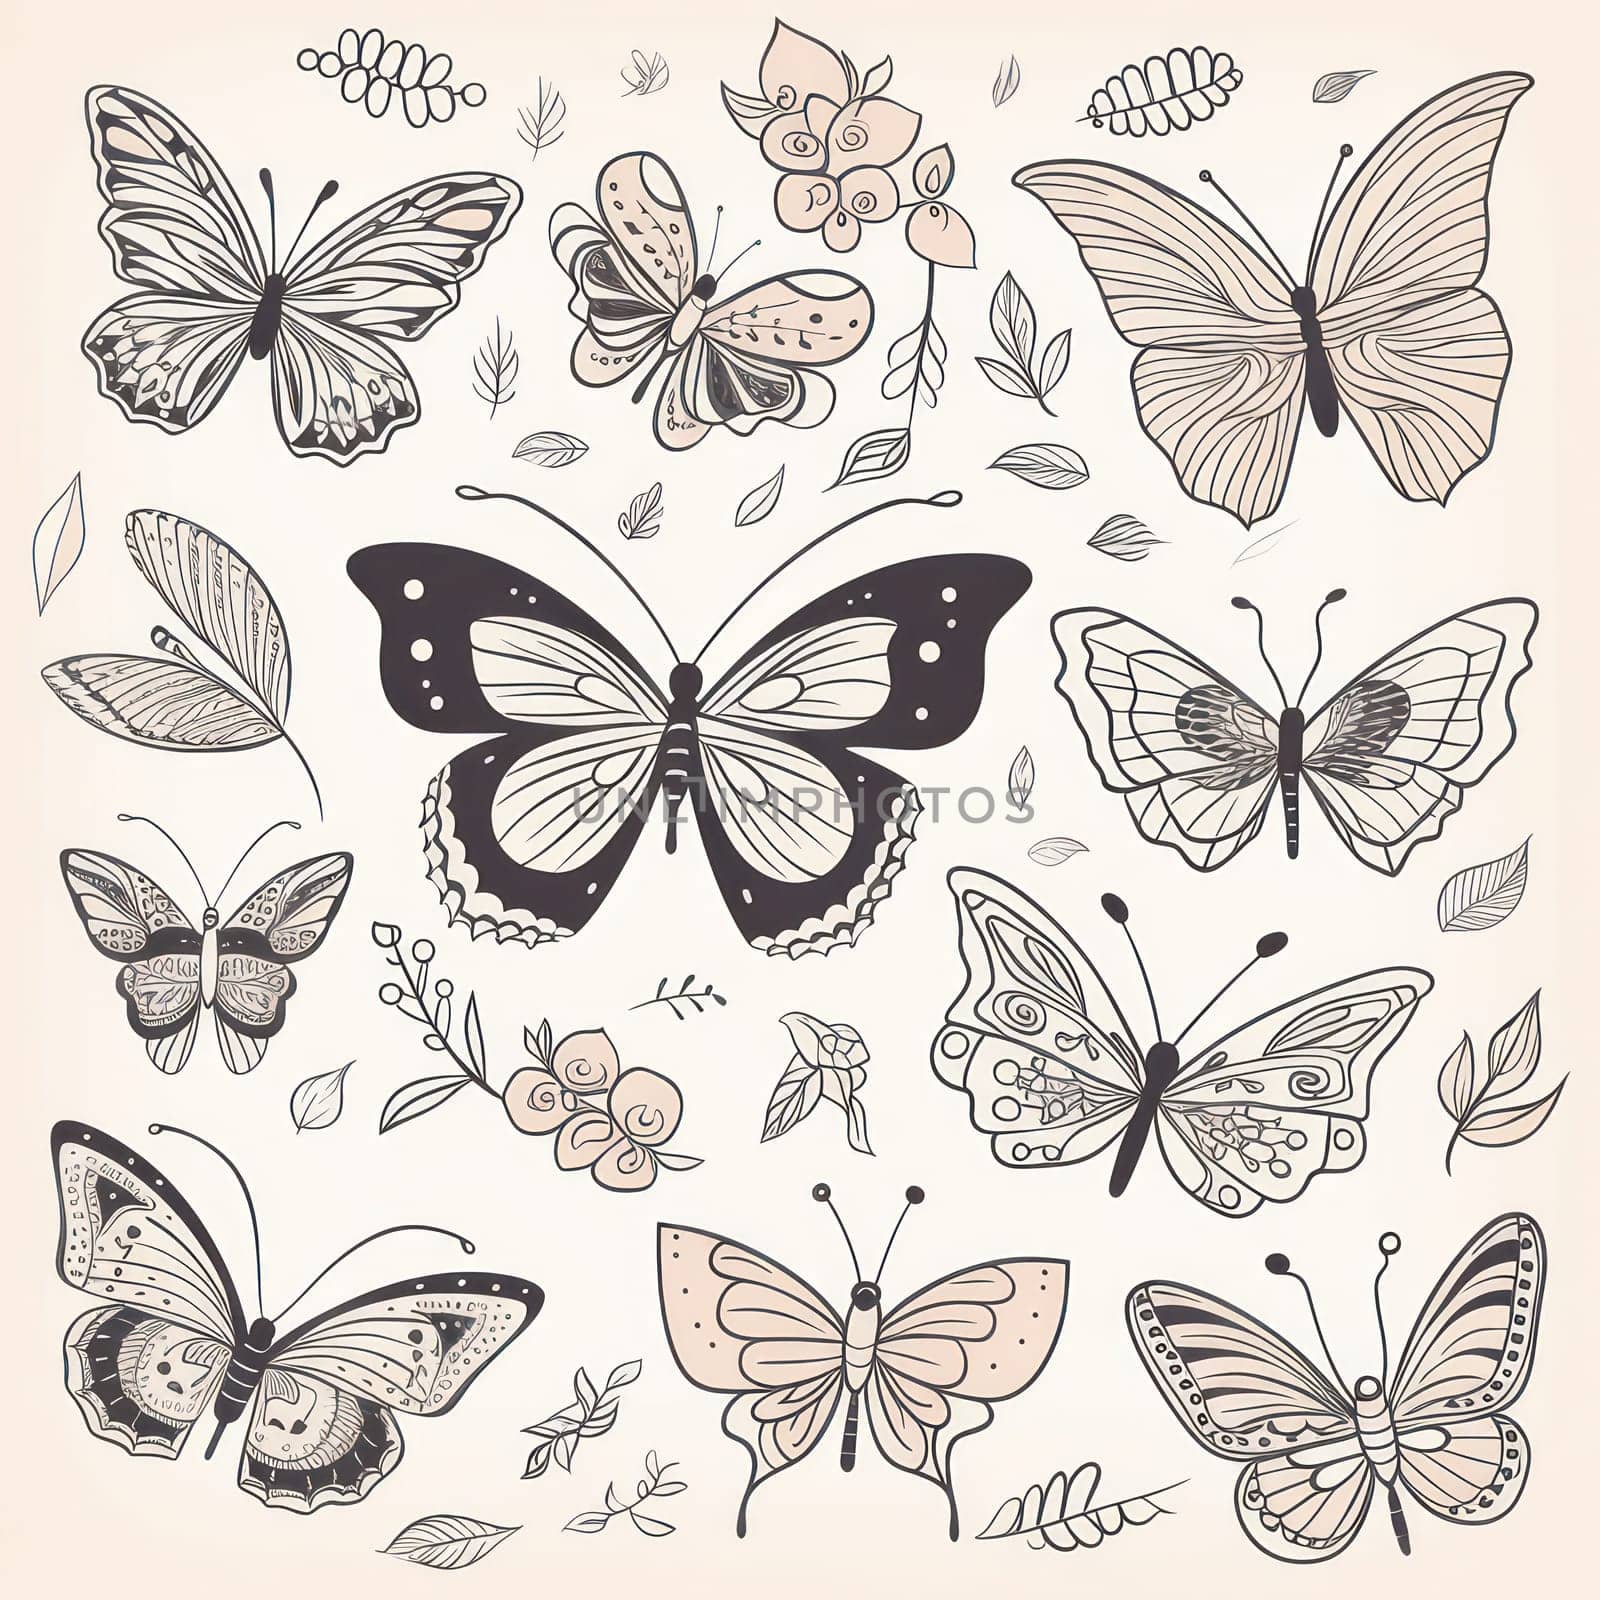 Decorative Butterfly Illustration Set: A Flight of Nature's Elegance Sketched on Vintage Paper by Vichizh